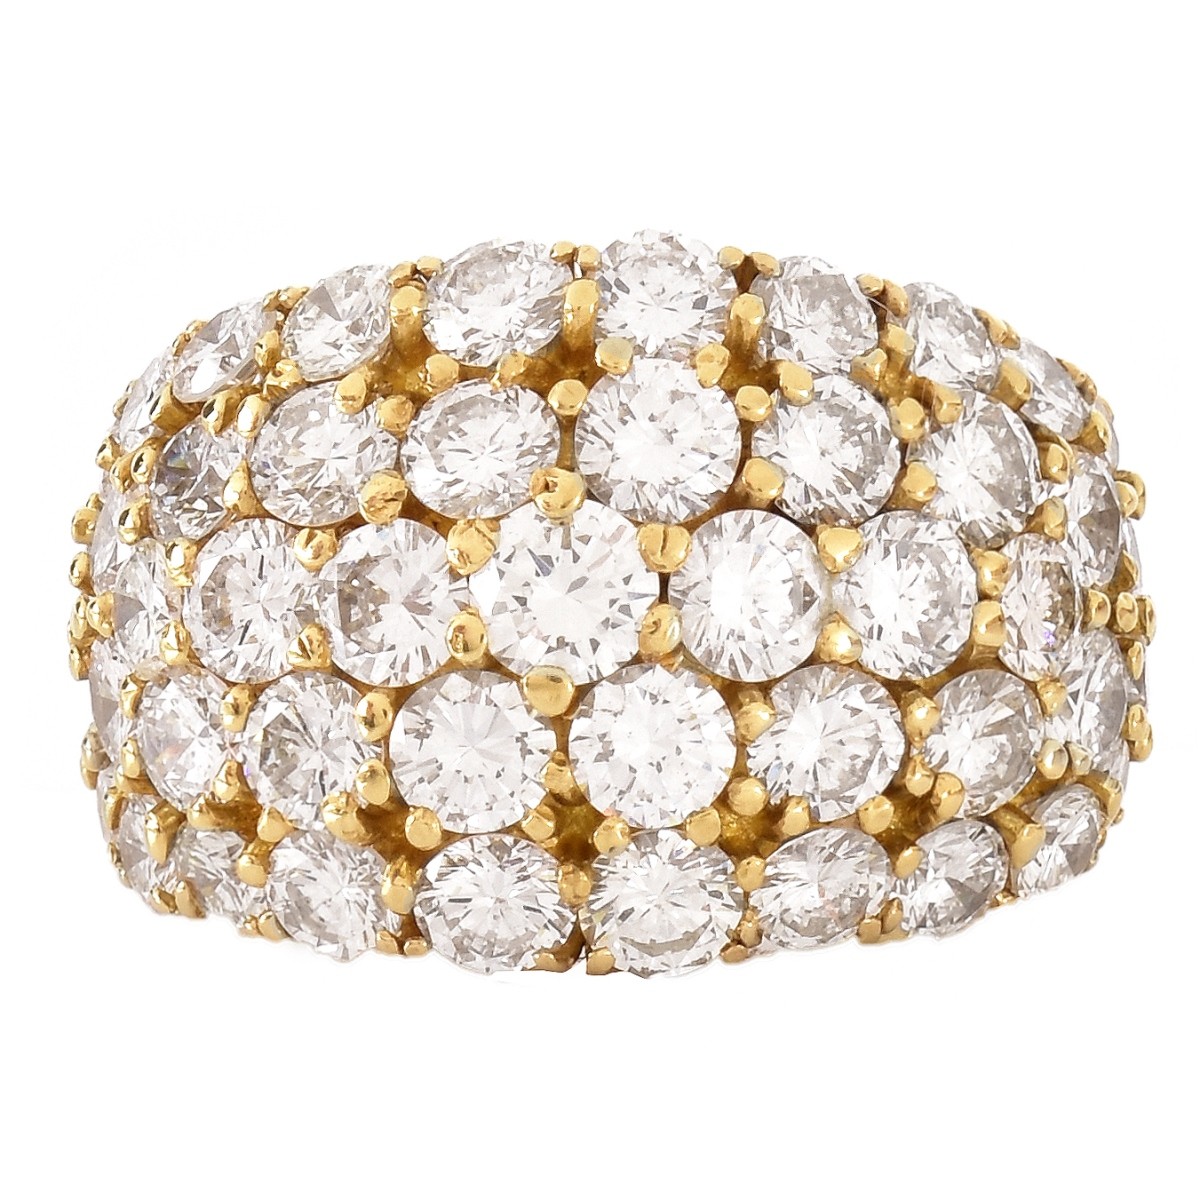 6.0ct TW Diamond and 18K Gold Ring